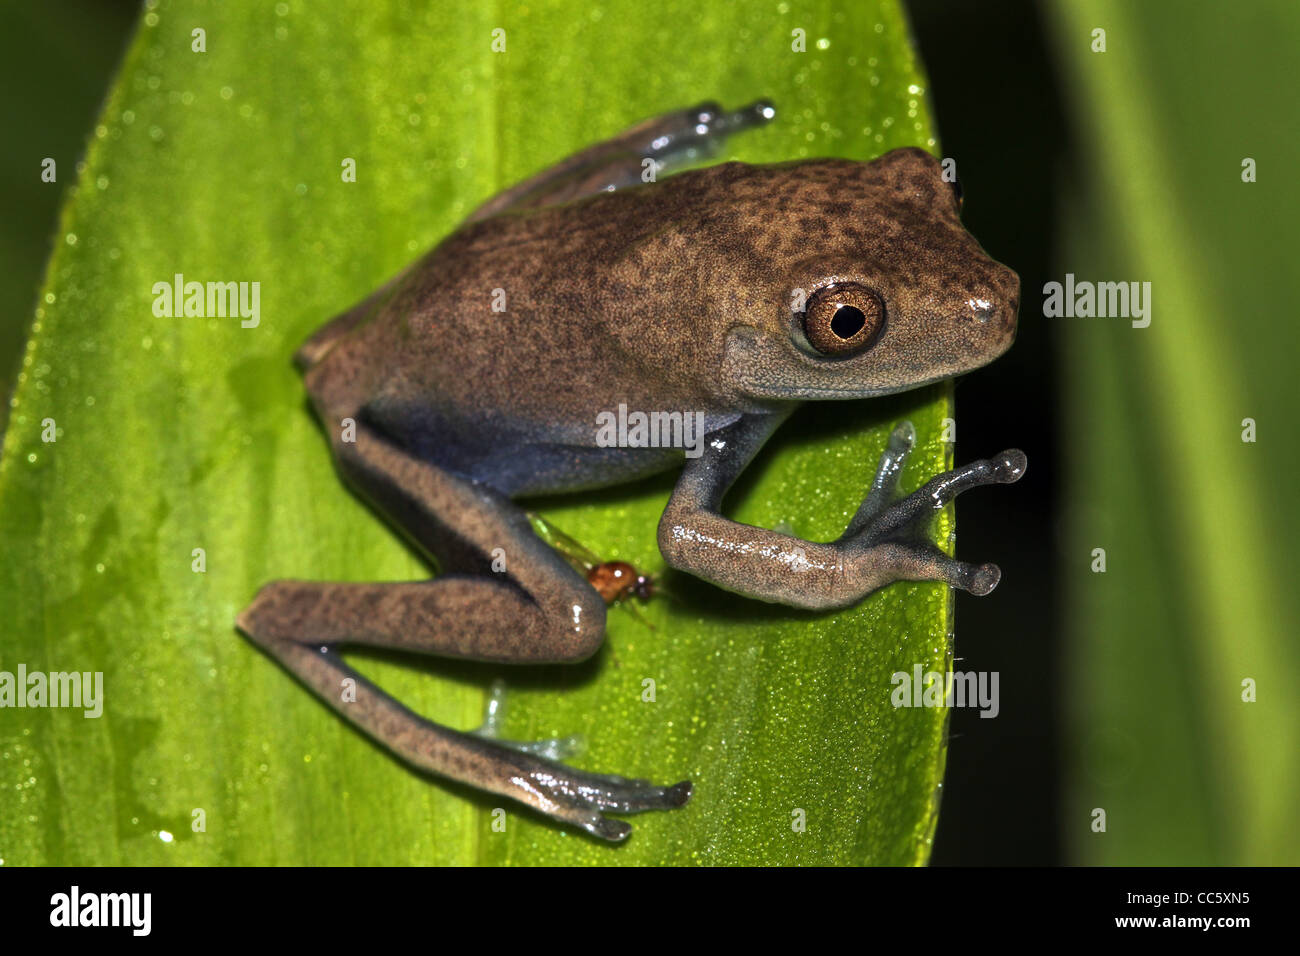 A baby Map Treefrog (Hypsiboas geographicus) in the Peruvian Amazon Stock Photo